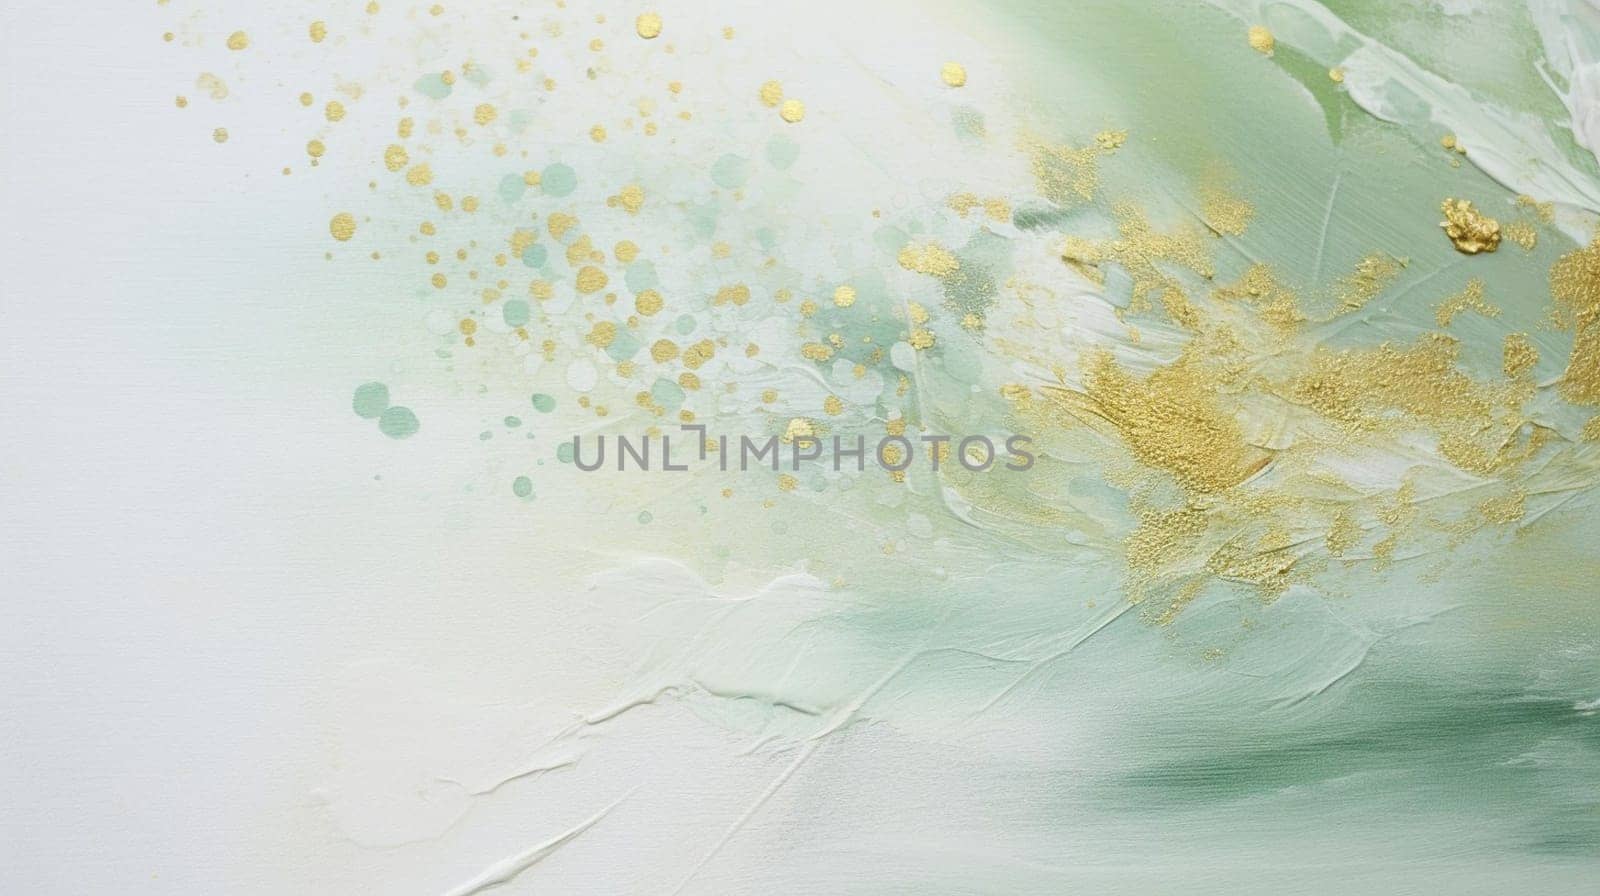 A macro photograph capturing the intricate patterns of a liquid green and gold painting on a white background, showcasing the fluidity and transparency of the art